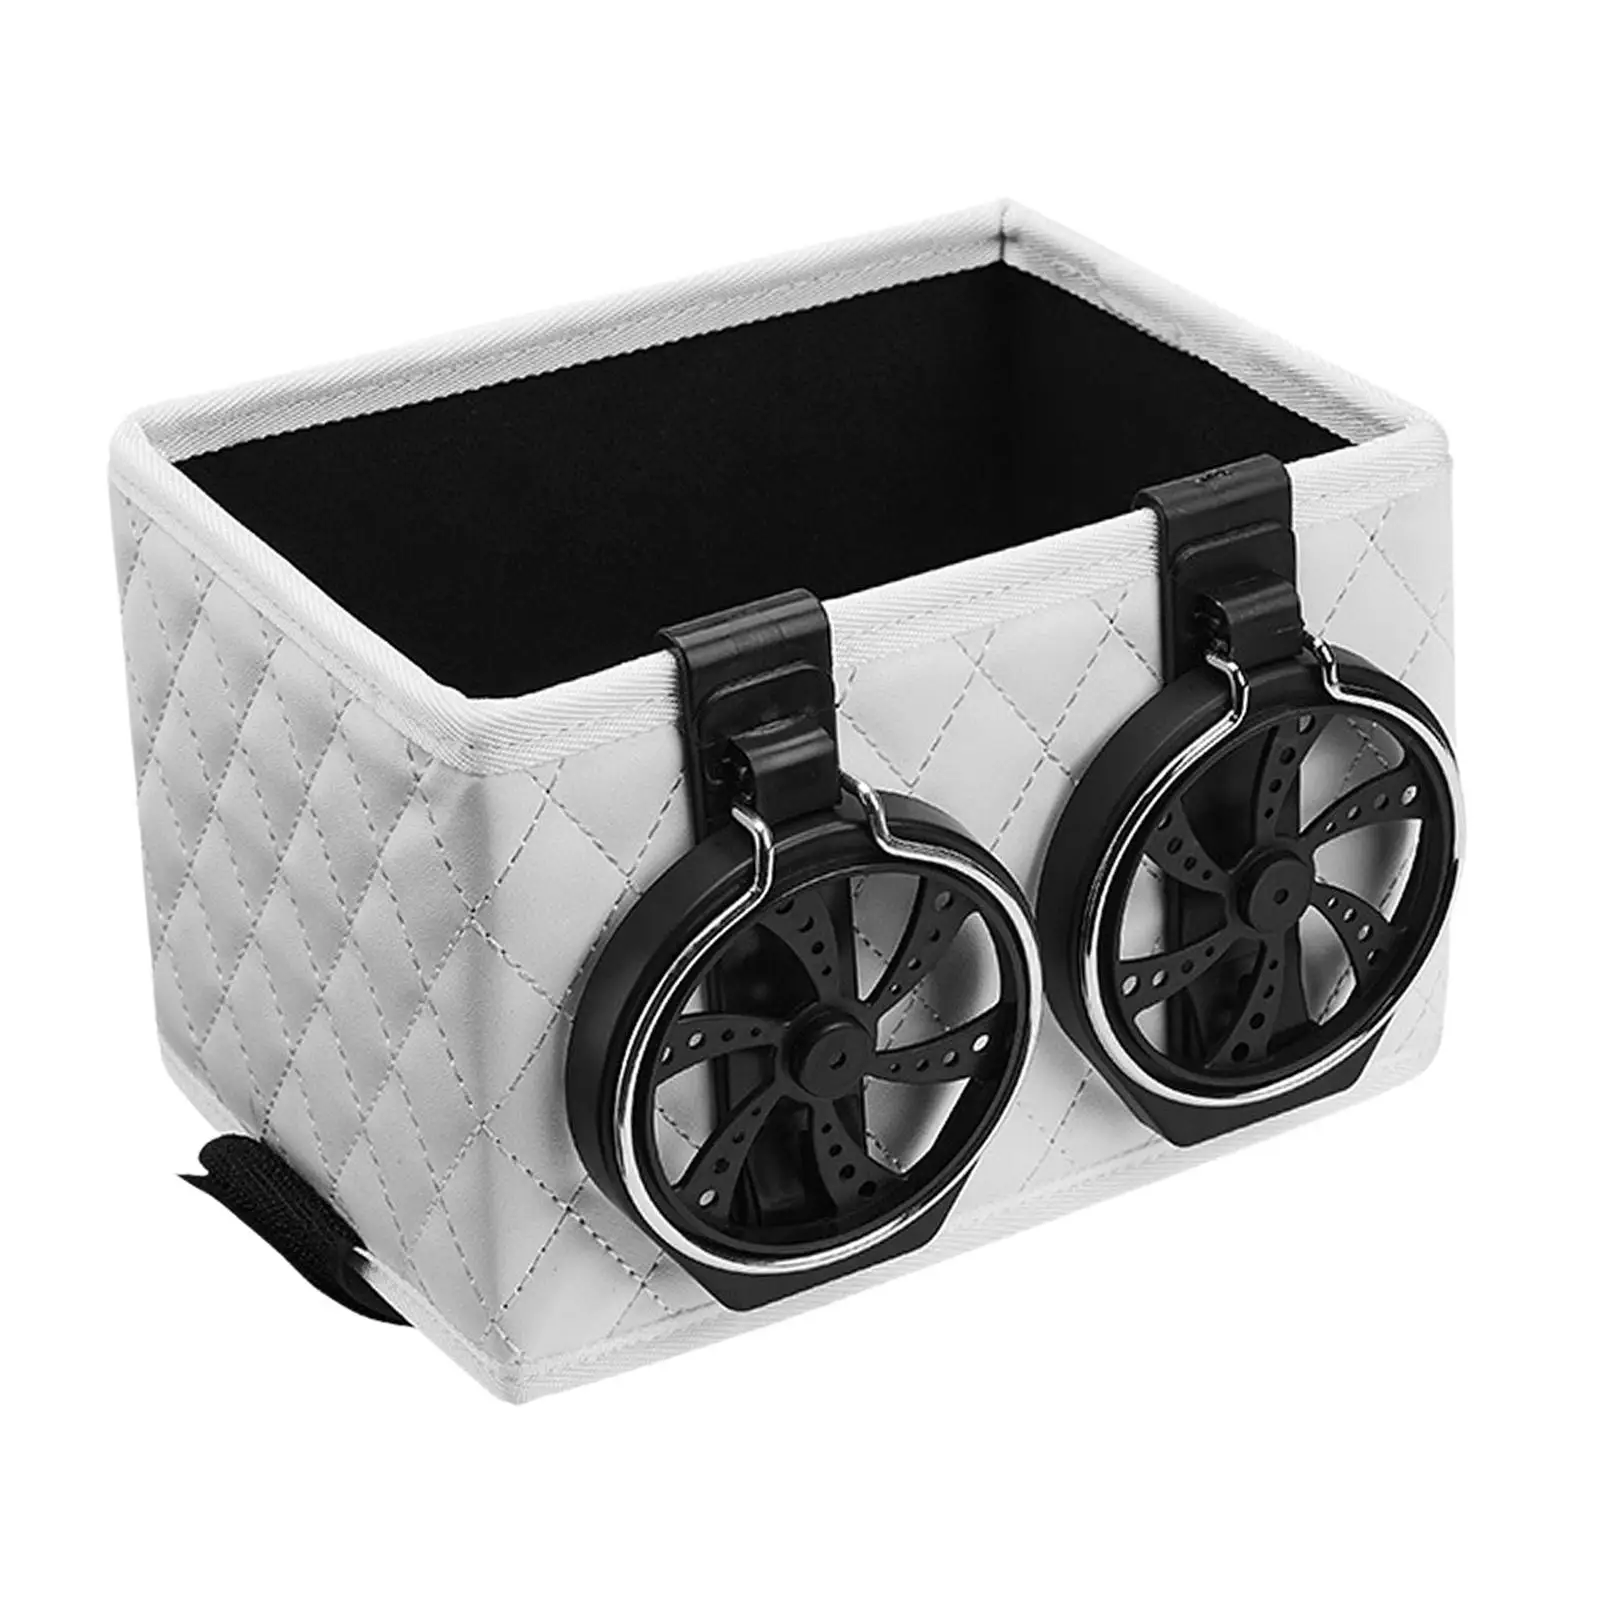 Universal Car Storage Box Multifunctional Car Console Side 2 in 1 Tissue box Cup Holder for Paper Towels Keys